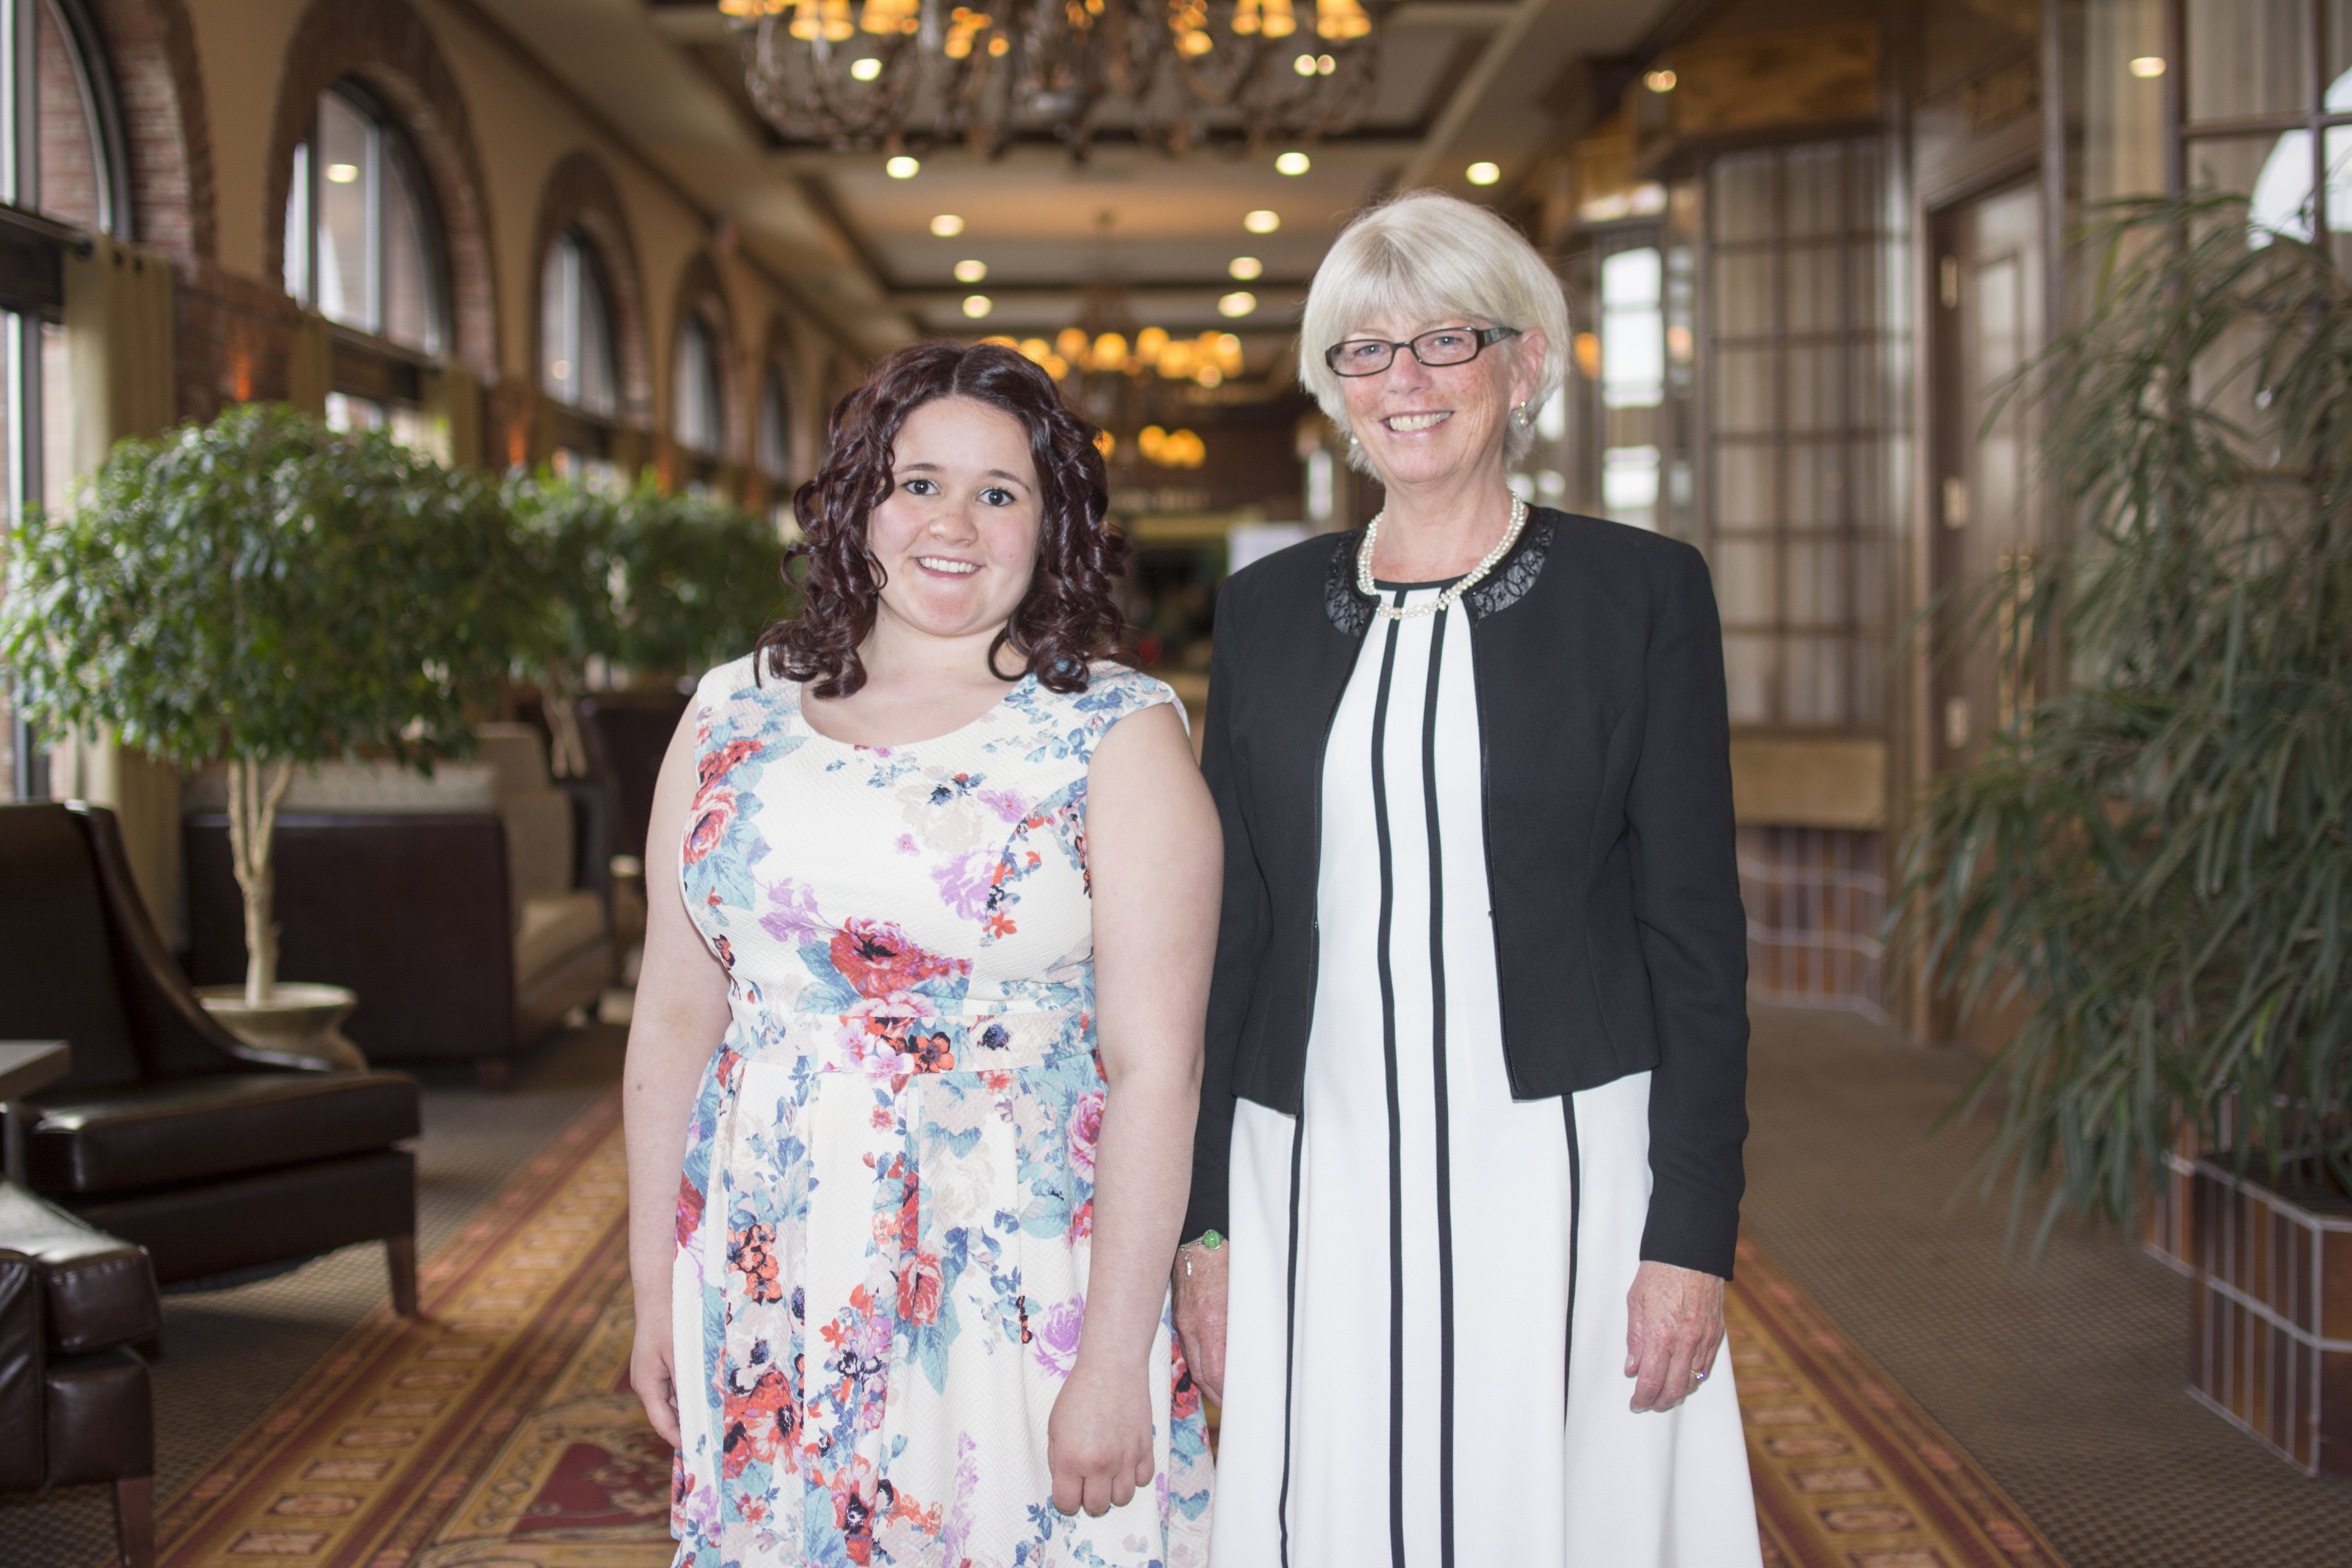 COMMUNITY RECOGNITION – The 2015 Young Citizen of the Year and Citizen of the Year were presented to Stephanie Aubuchon and Sheila Bannerman last week at the Rotary Clubs of Red Deer annual Citizen of the Year Gala held at the Sheraton Hotel and Conference Centre.